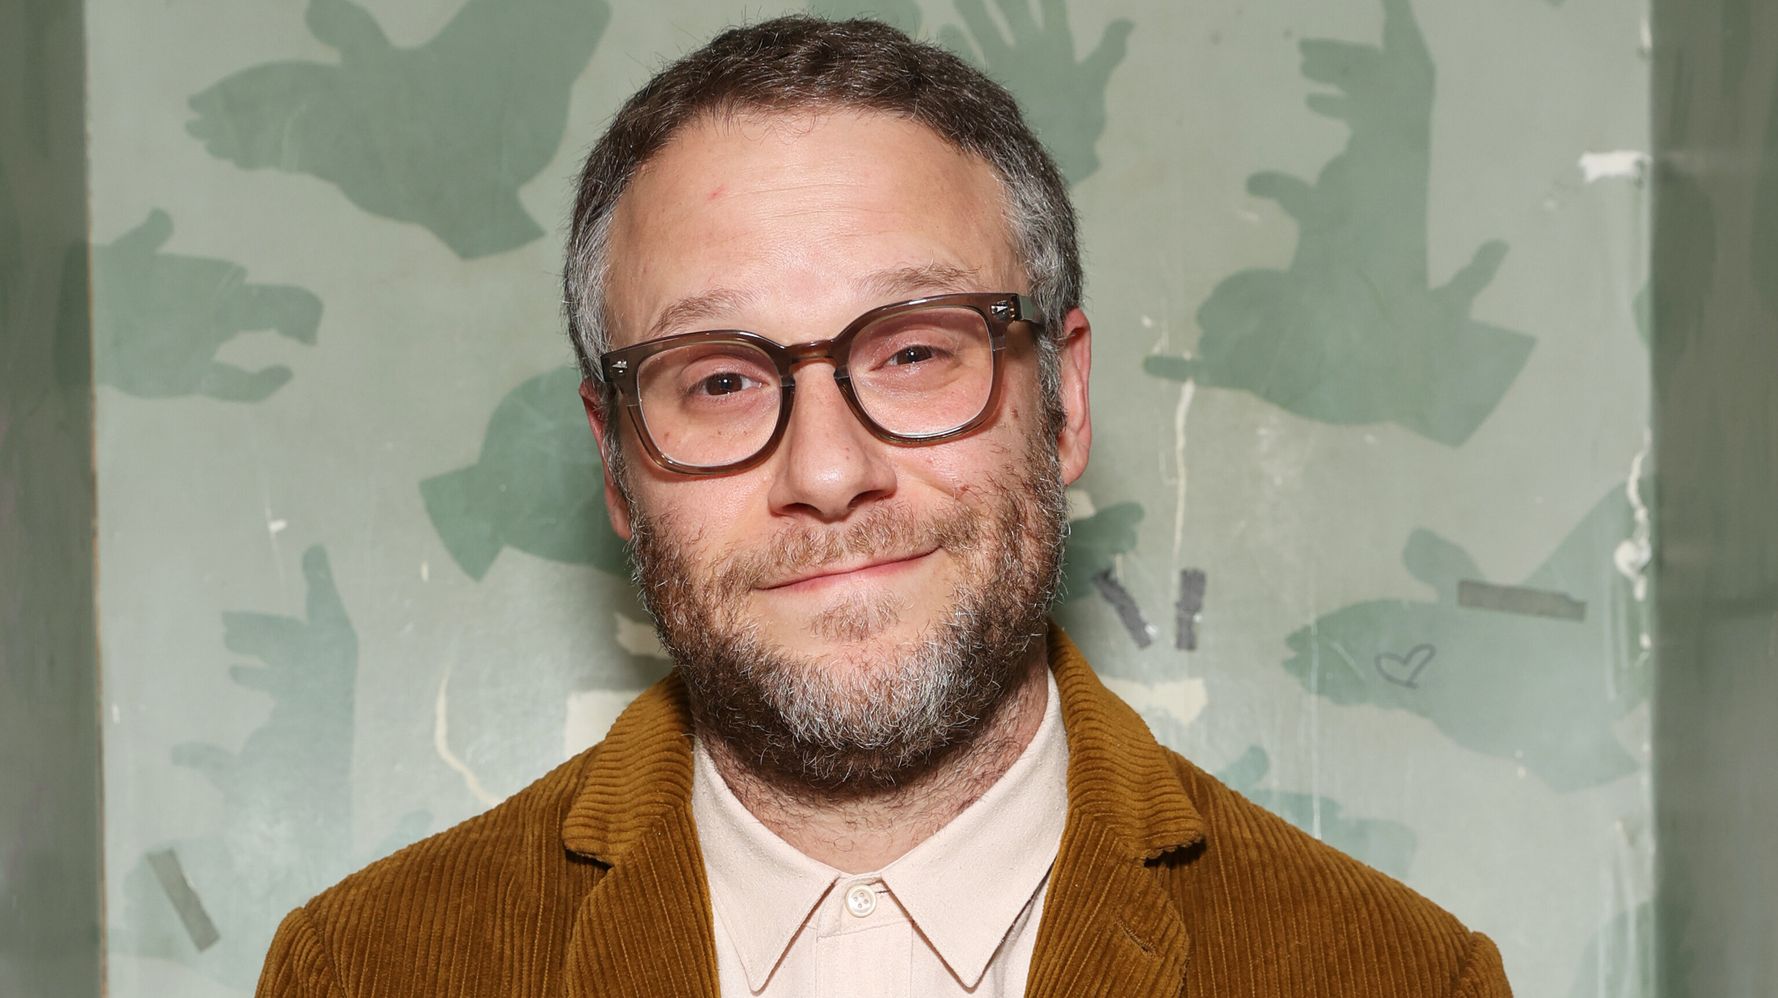 Seth Rogen Is Not Happy His Mom Keeps Talking About Sex On Twitter 6104